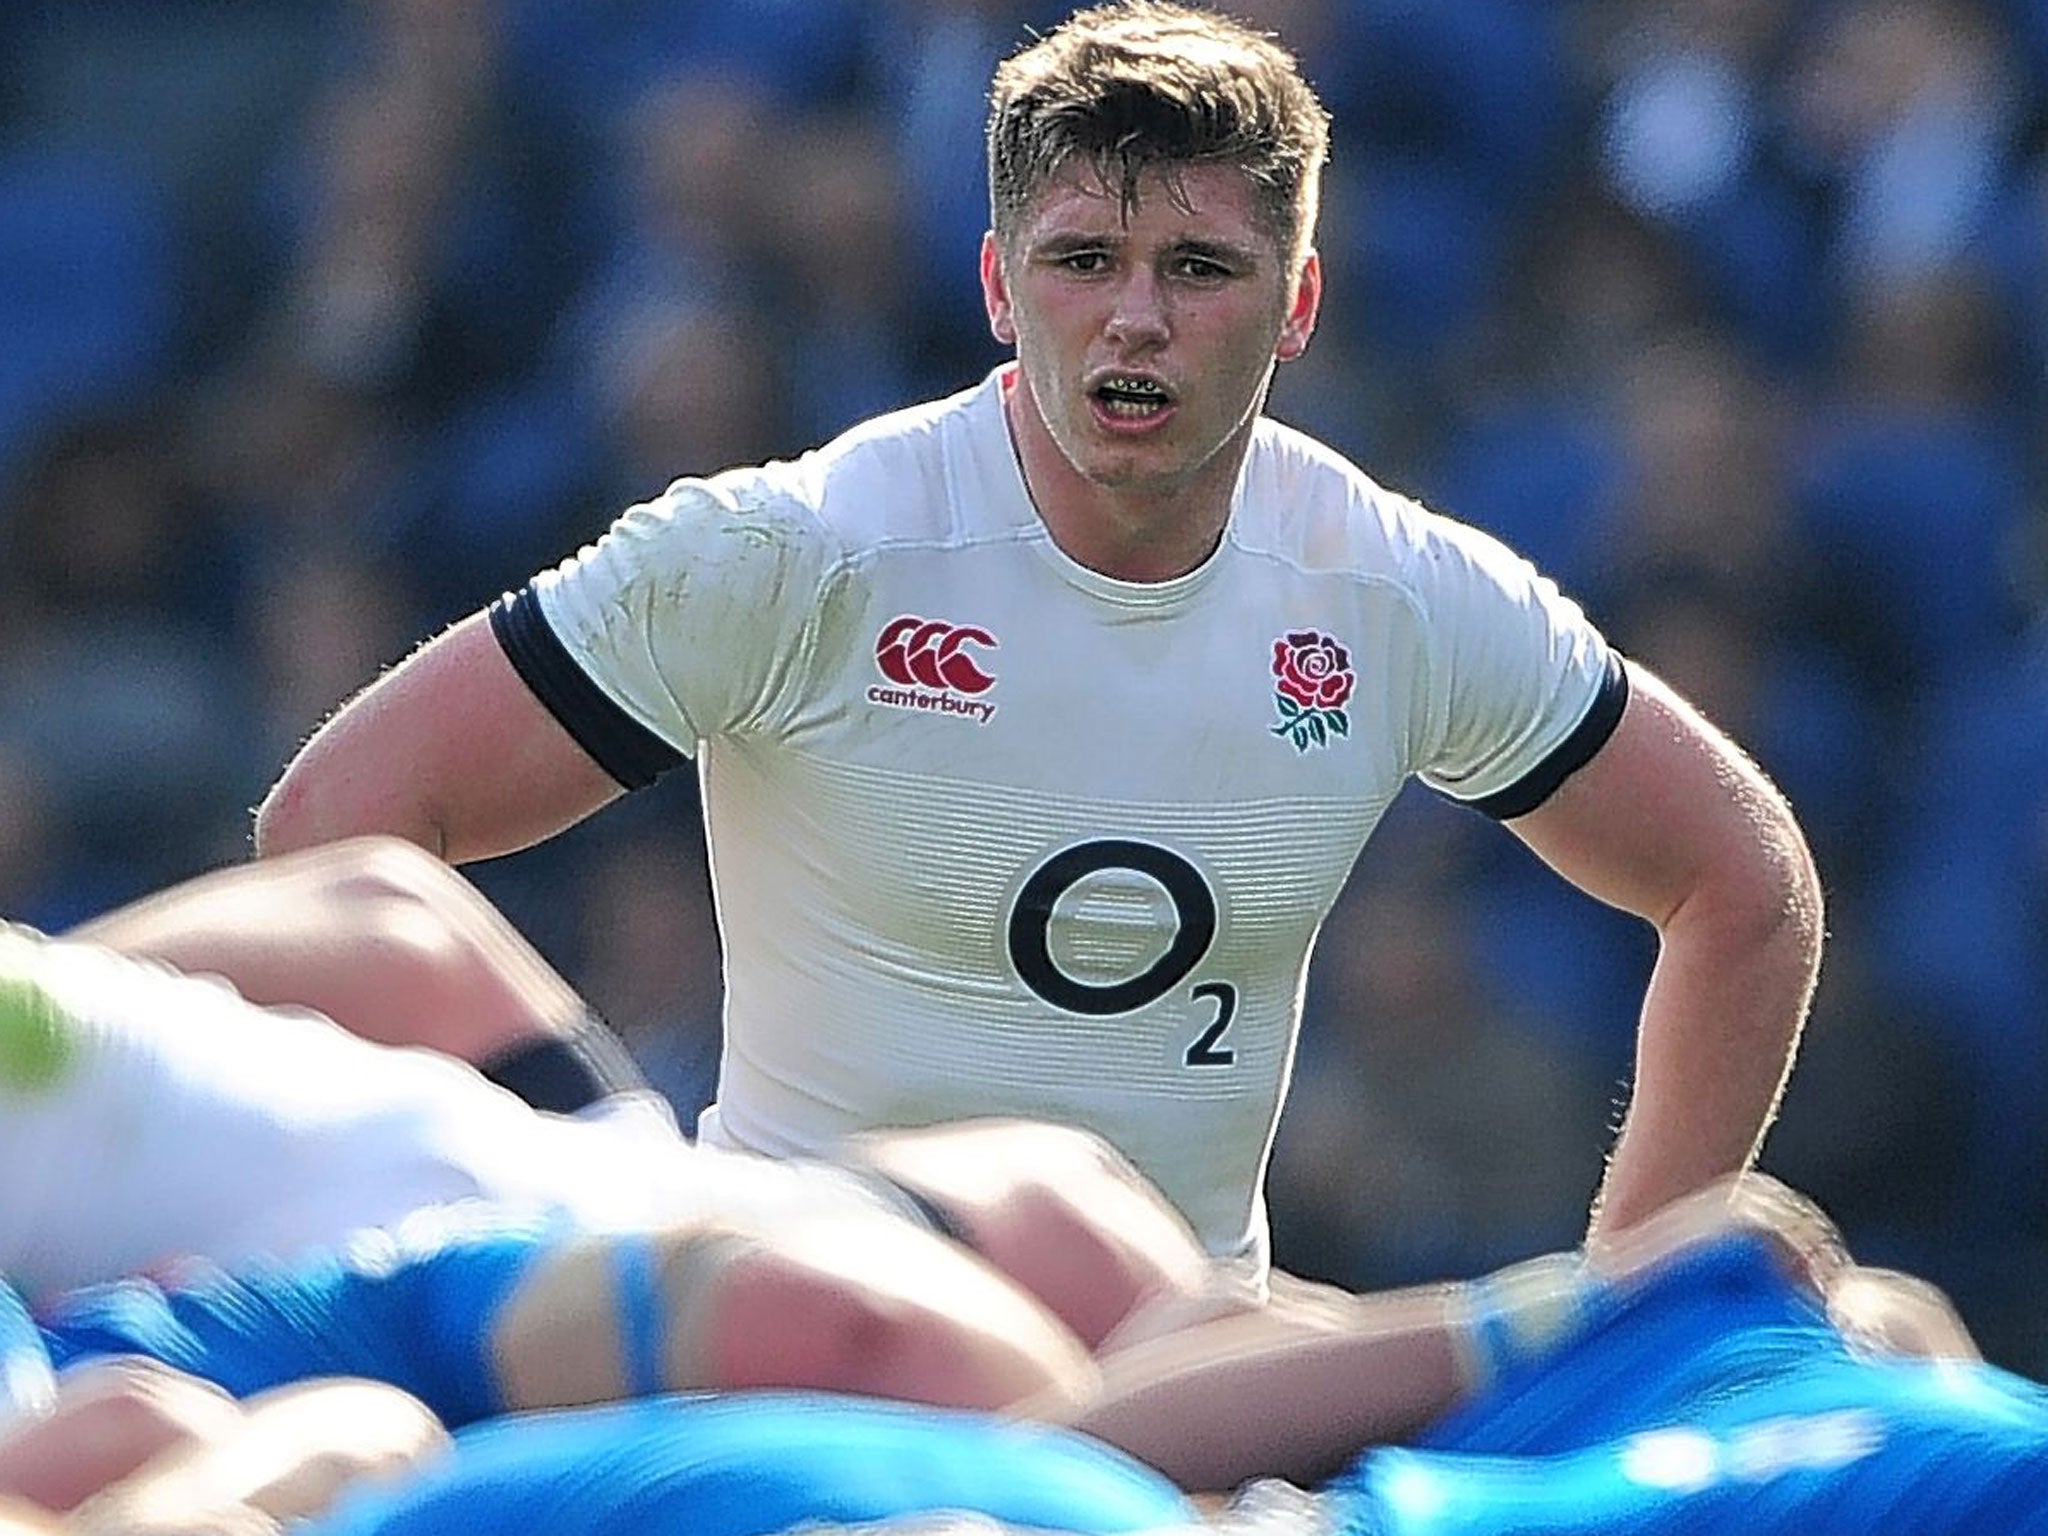 Owen Farrell surveys the scene during the victory over Italy in which he was excellent once again